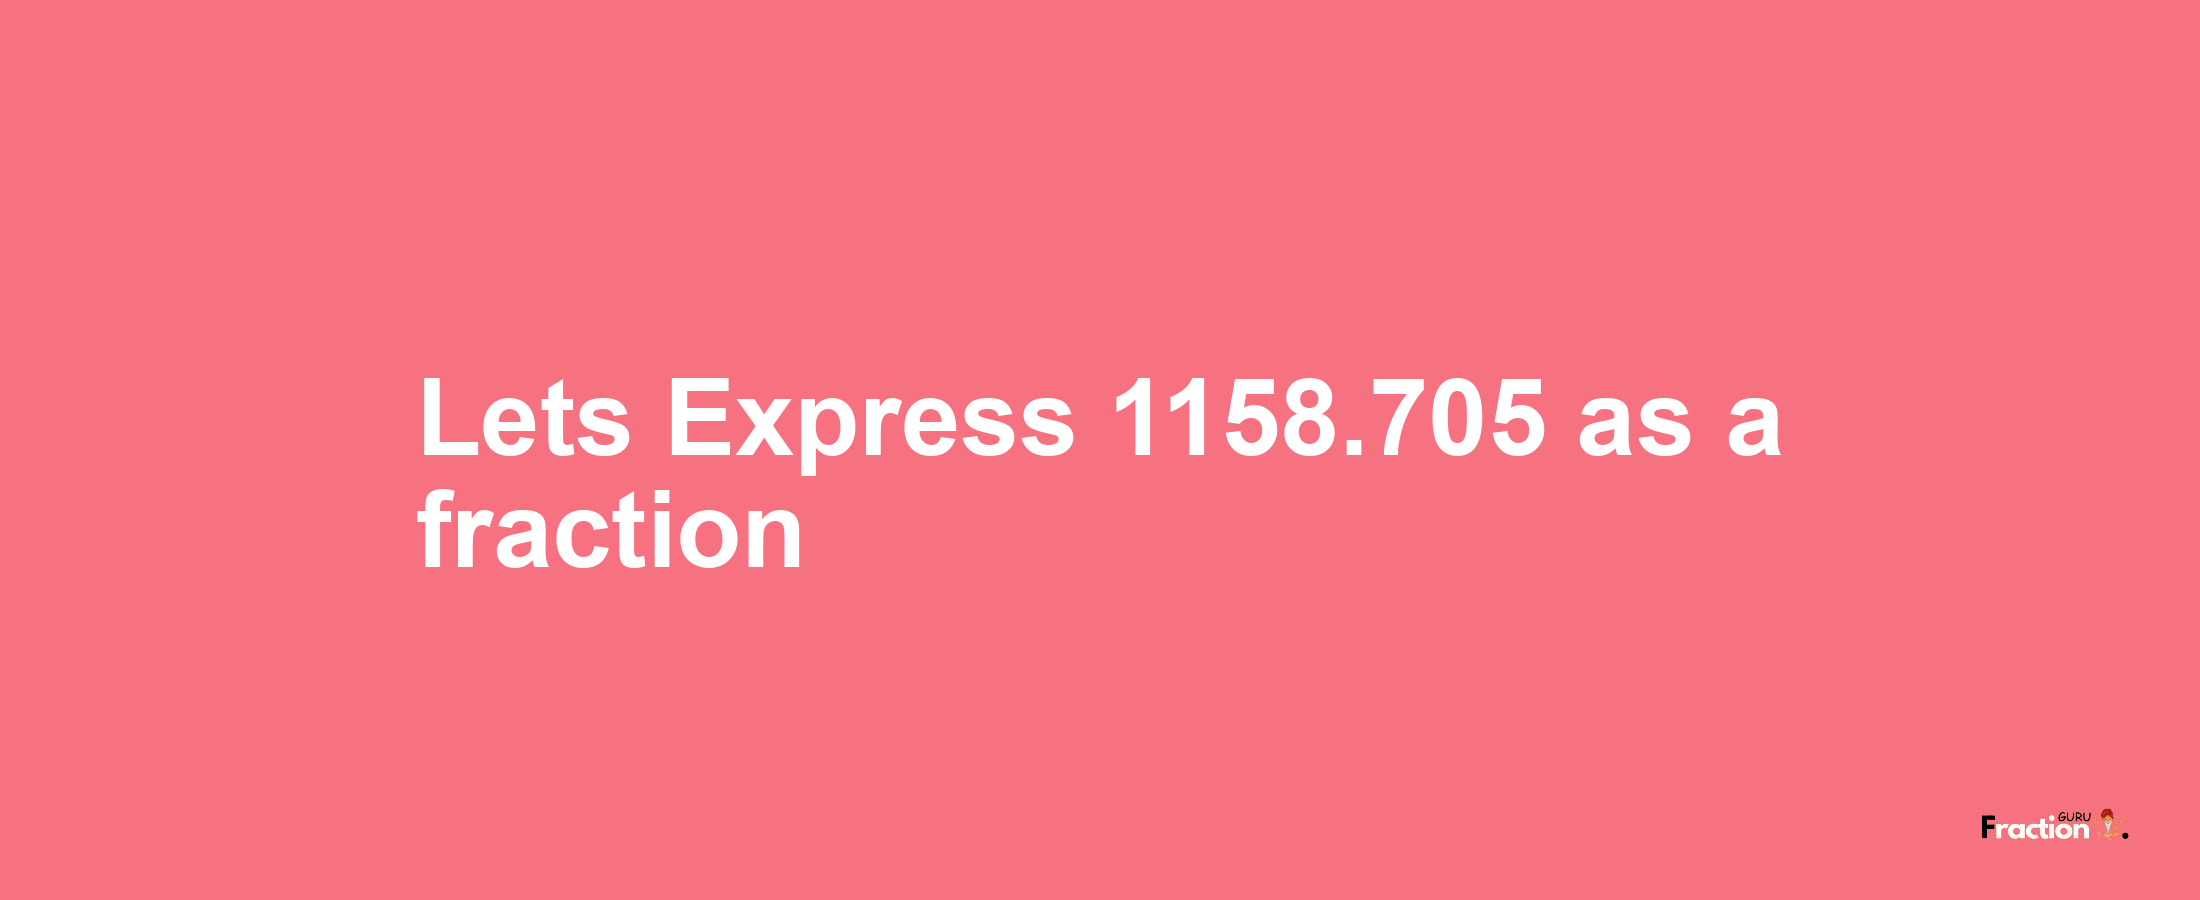 Lets Express 1158.705 as afraction